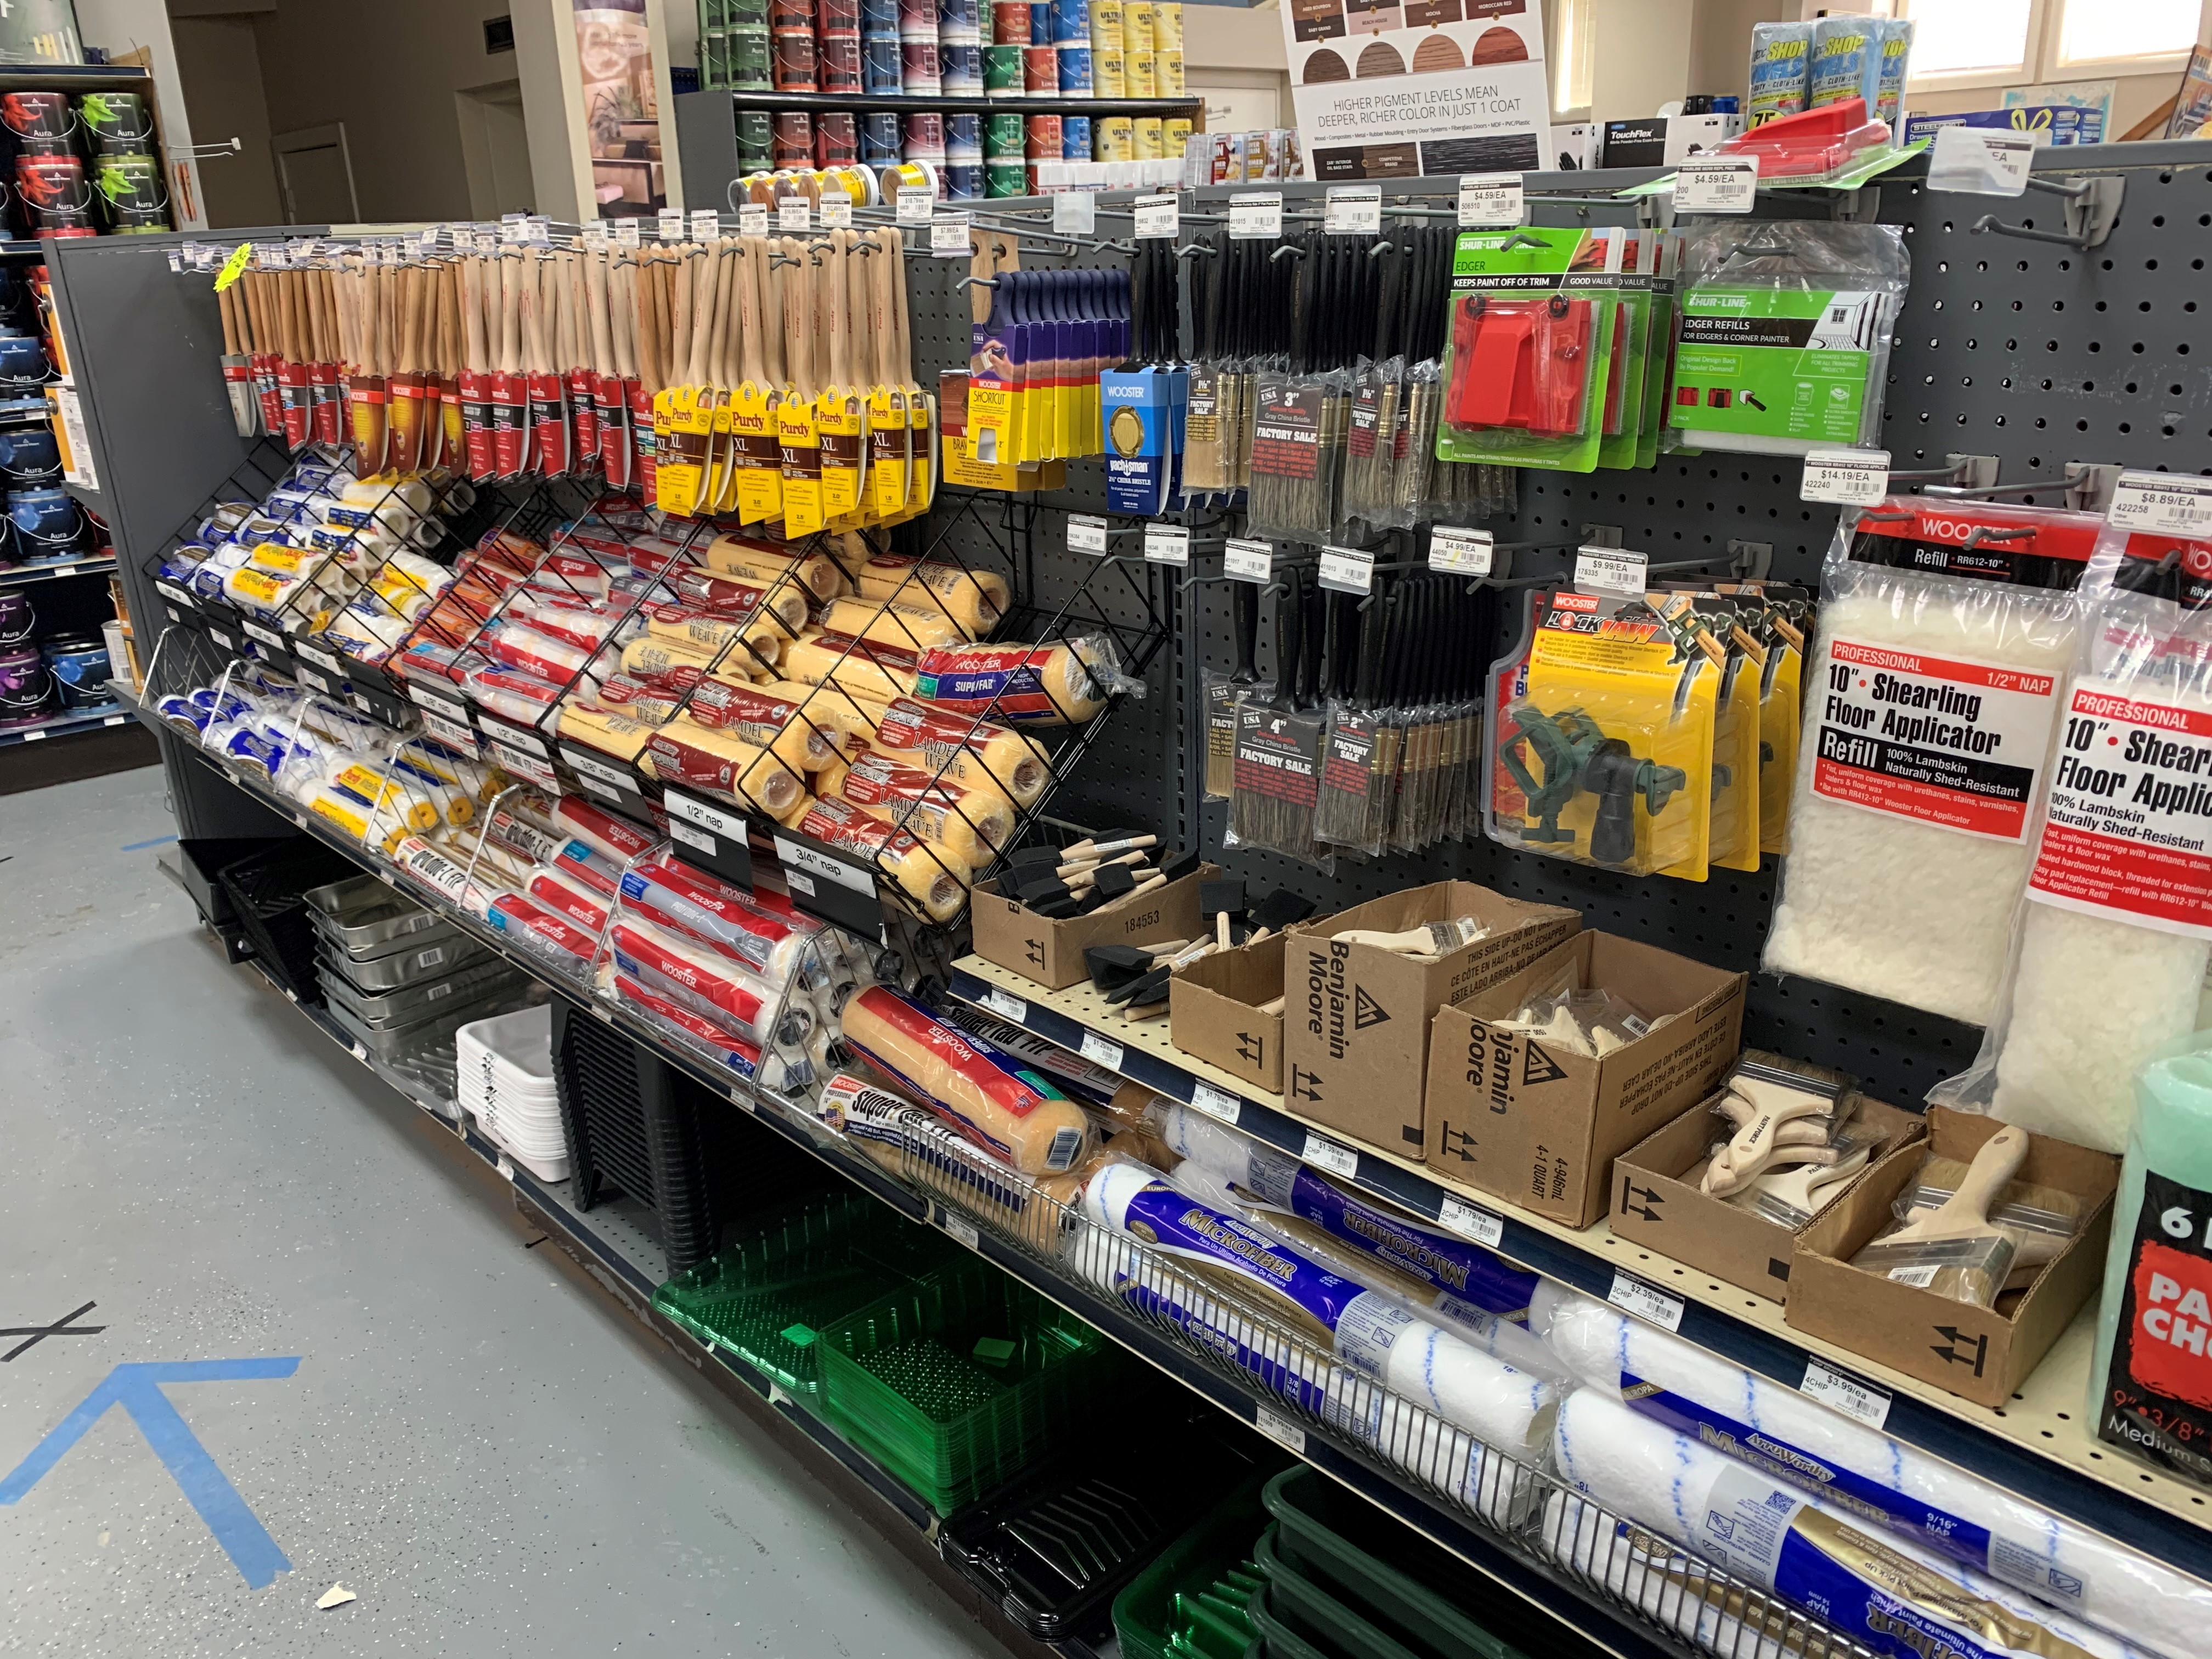 Purdy Brushes and Rollers, Wooster Brushes and Rollers, and  Paint Sundries